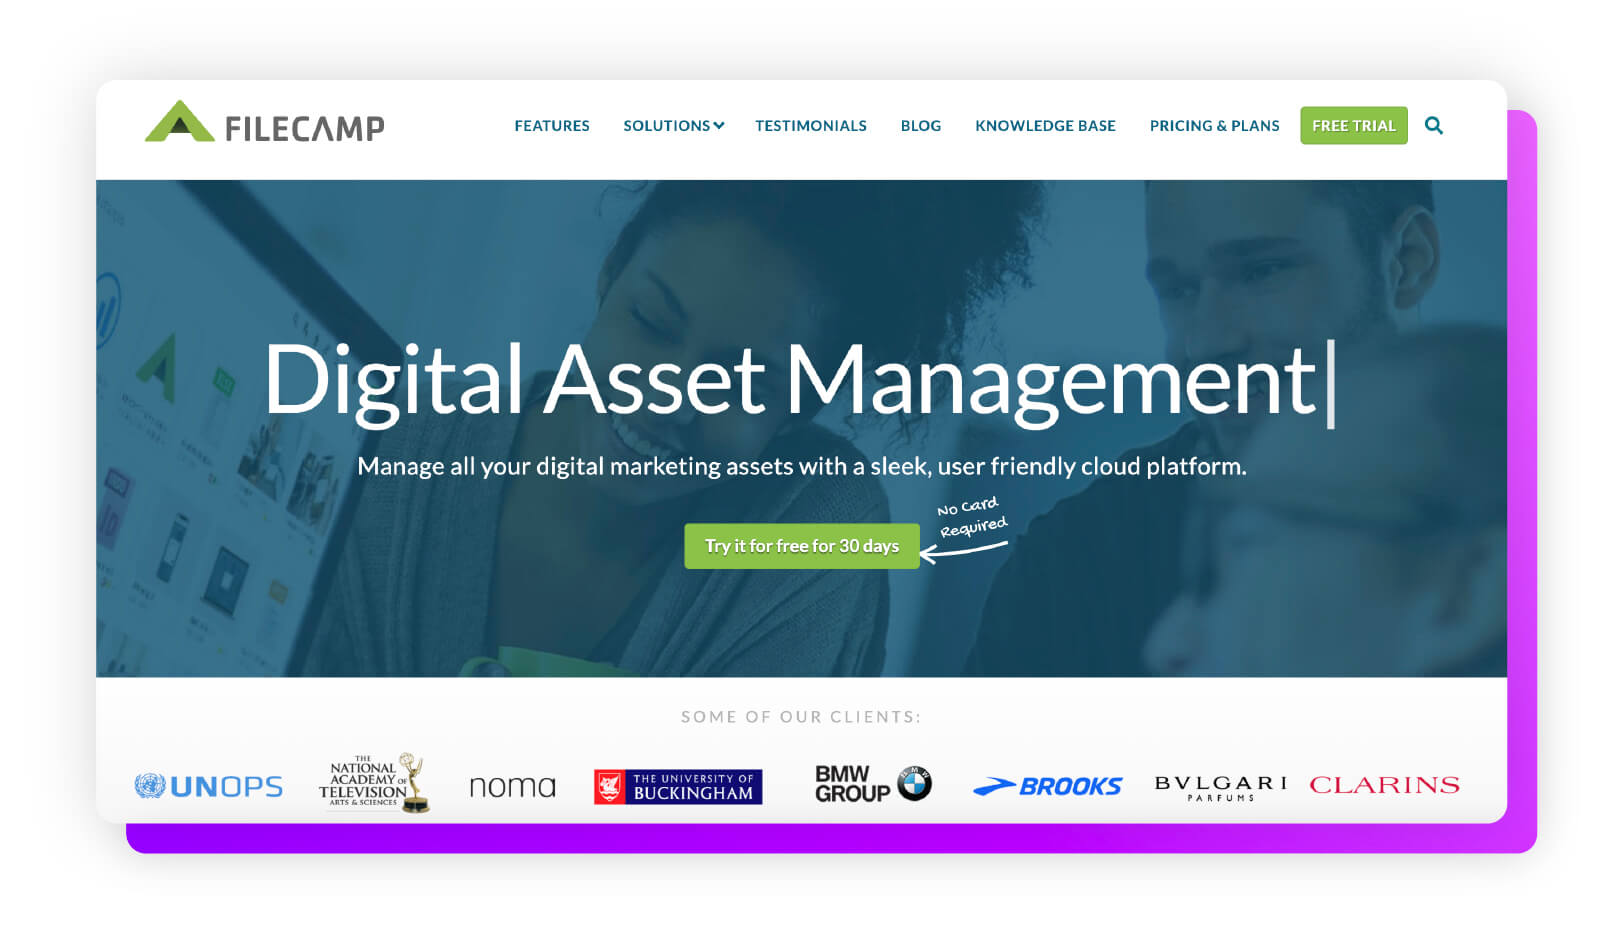 Filecamp as one of the best brand asset management software options.